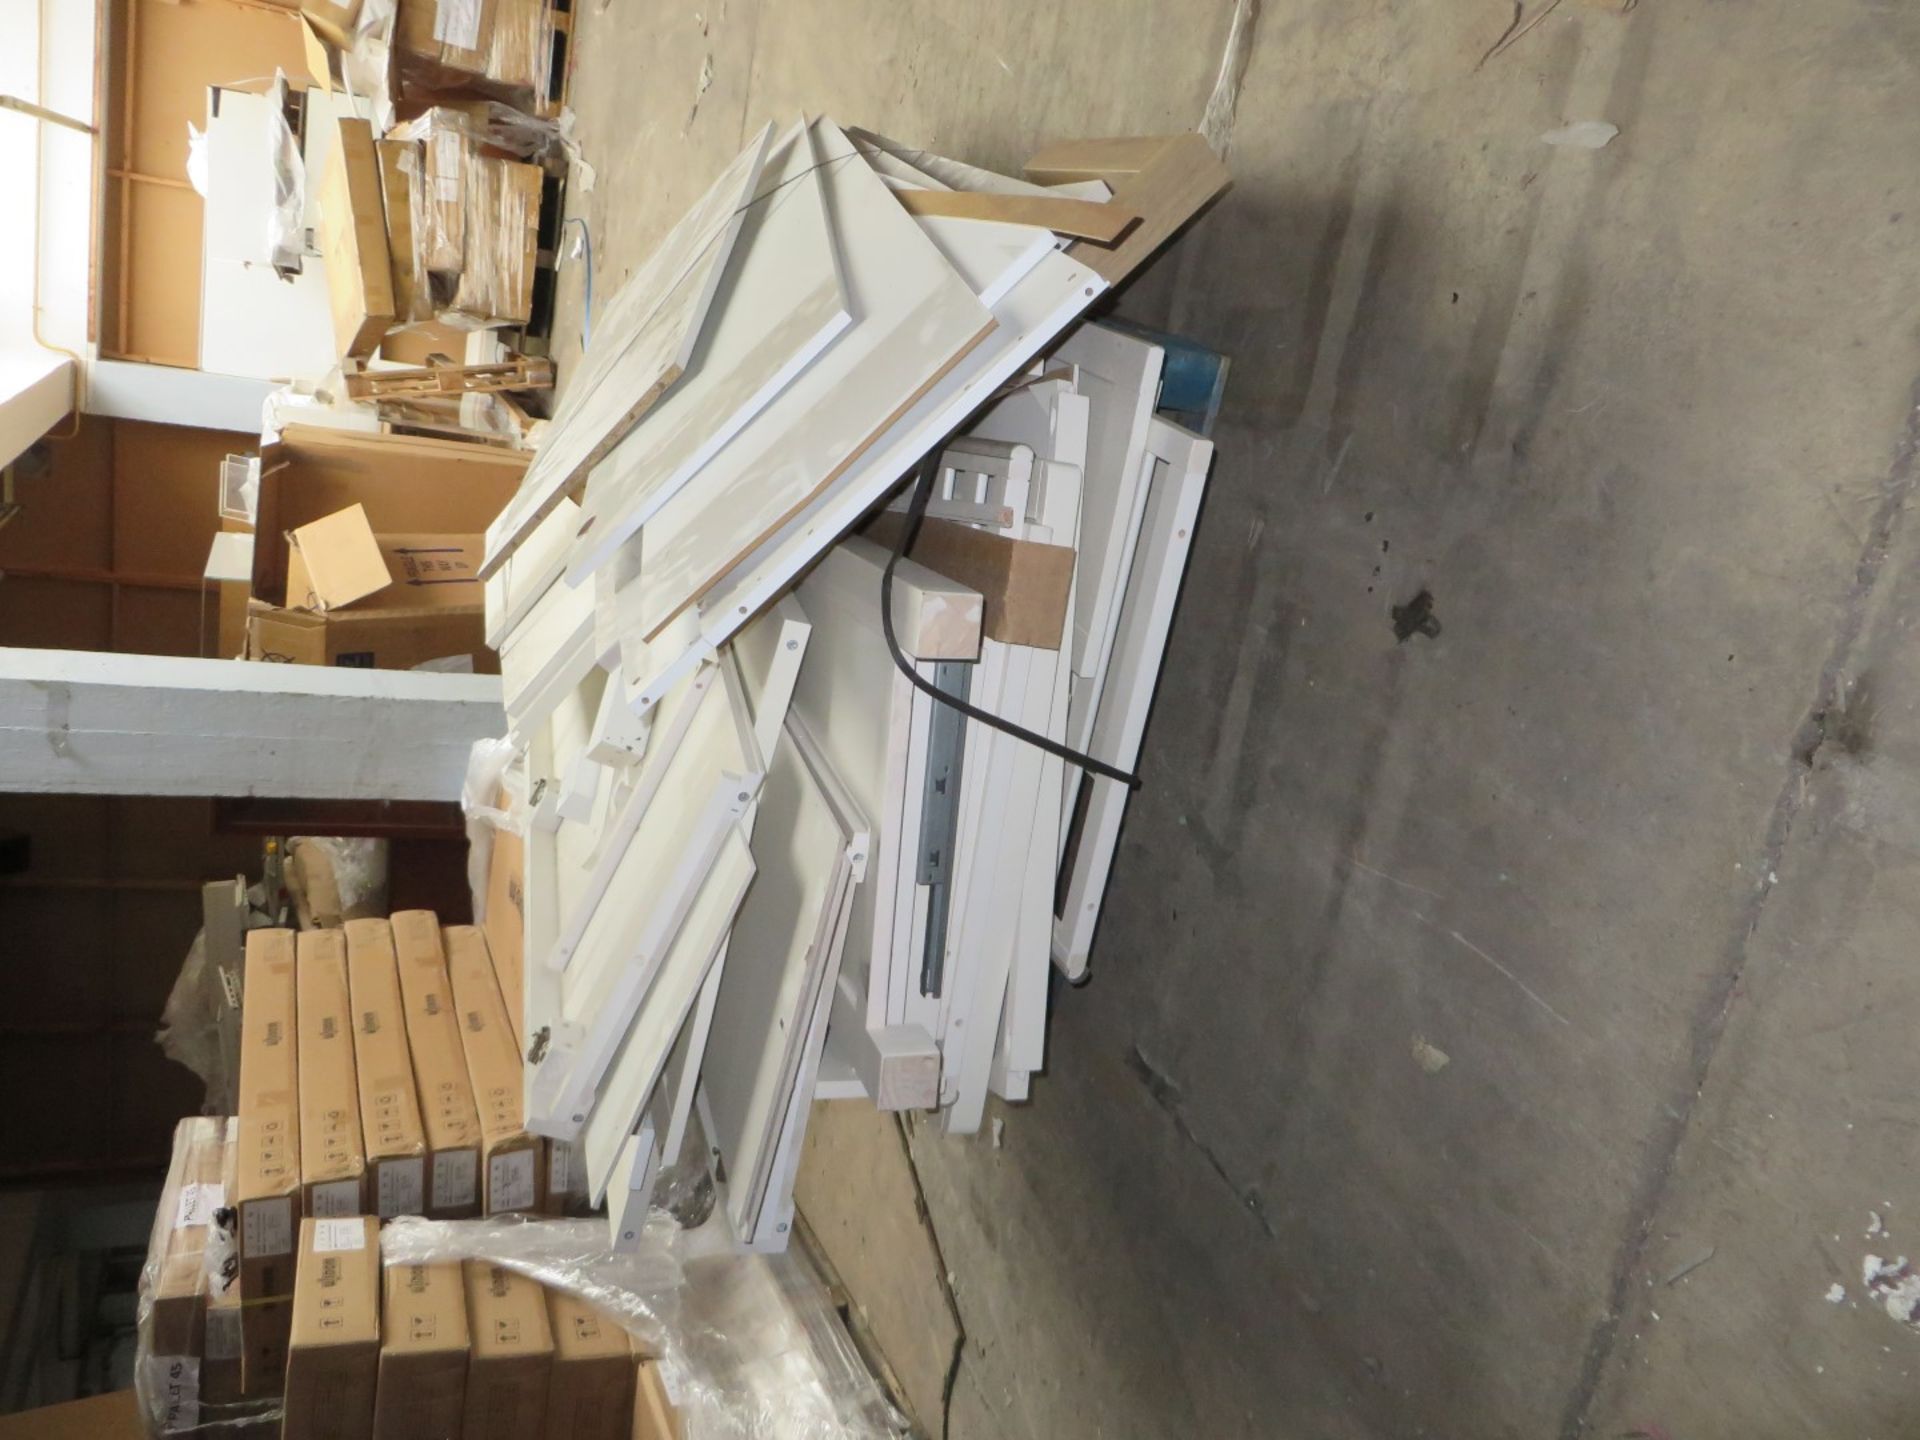 12 x Pallets of Assorted Silver Cross Nursery Furniture - CL185 - Ref: DSYMULTI - Location: Stoke-on - Image 8 of 13